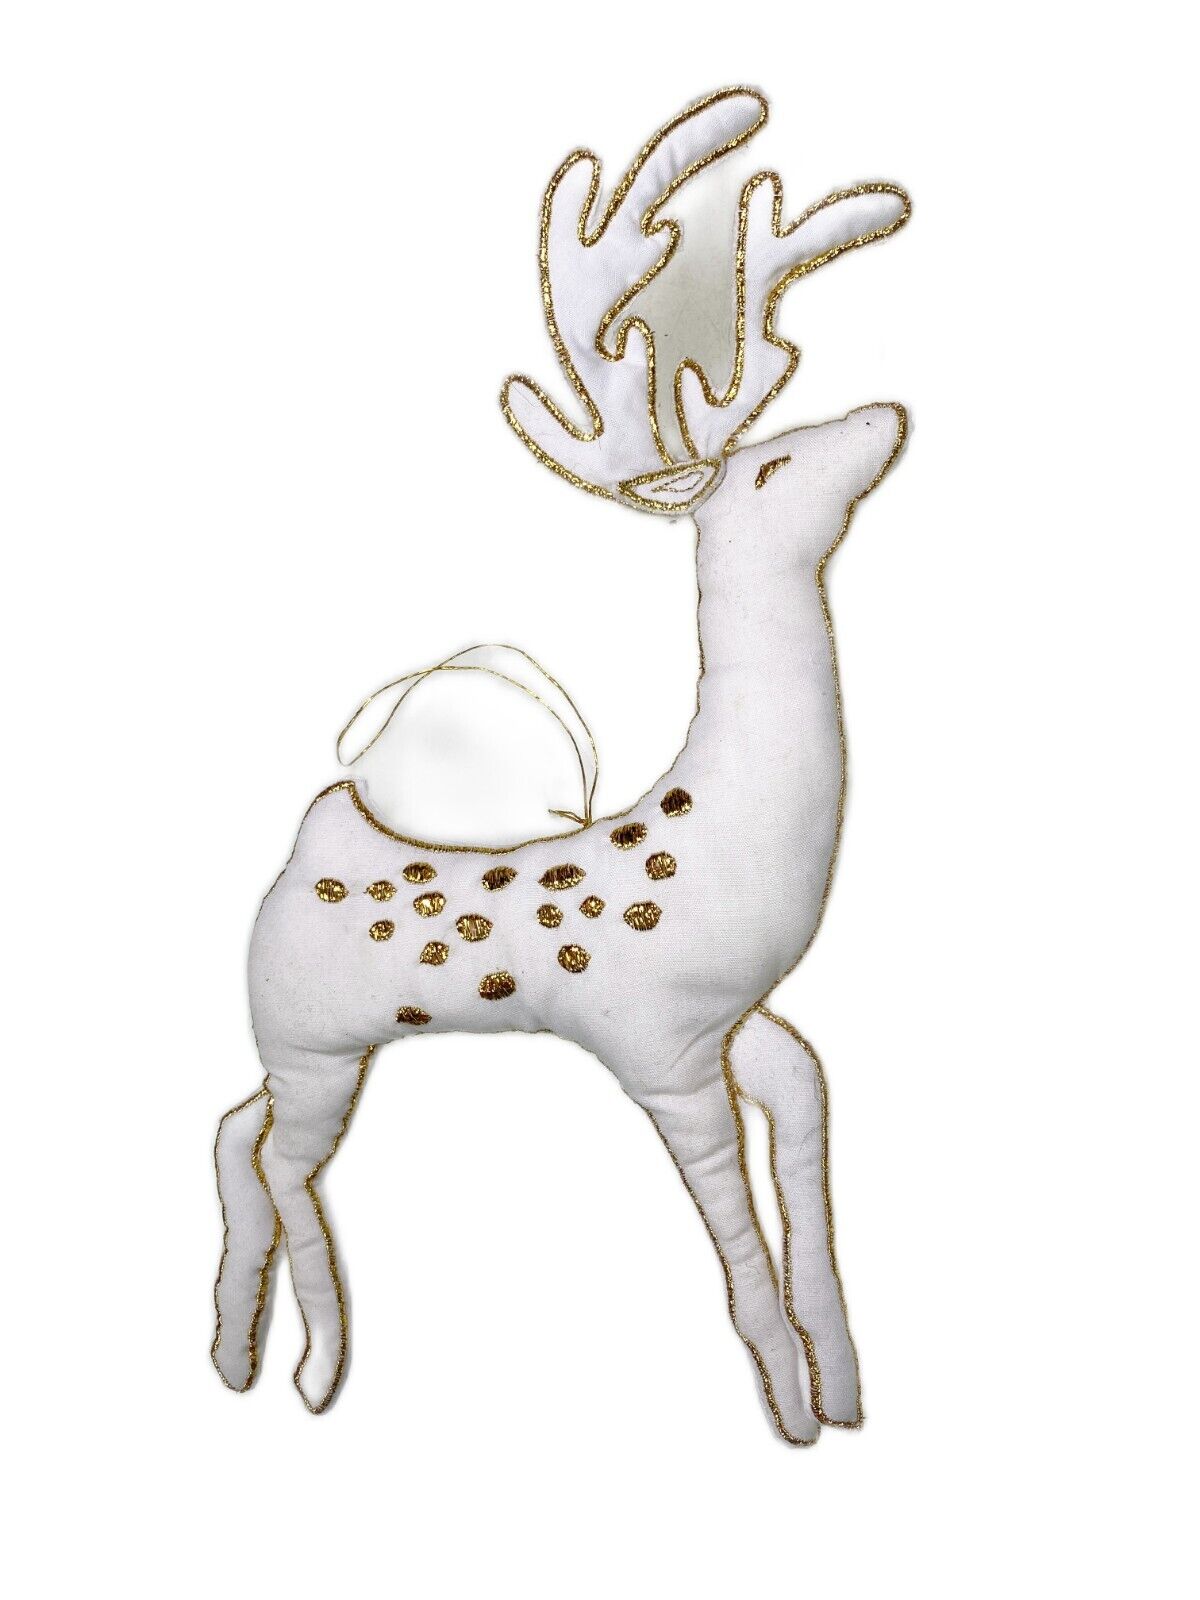 Plush Reindeer Christmas Holiday Ornament H9” x 6” White Gold Accent